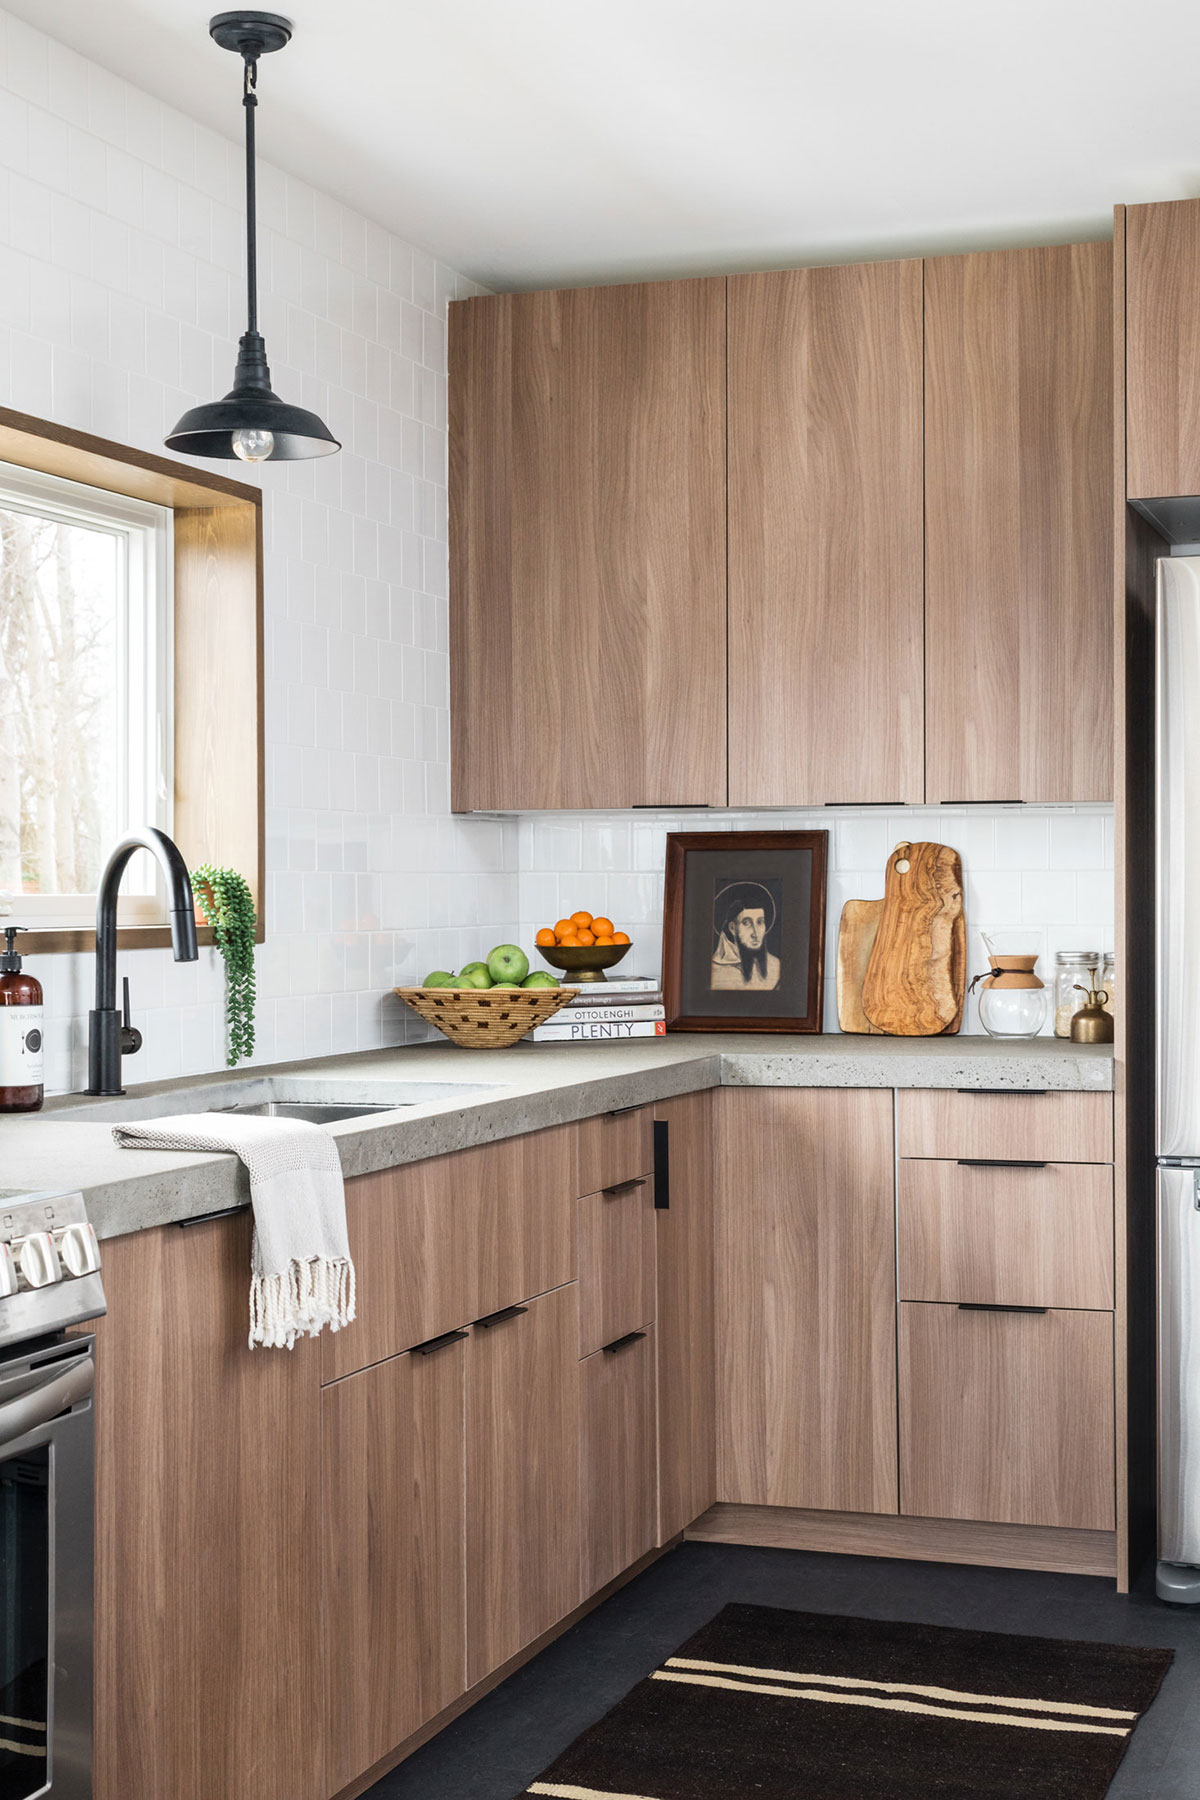 Ikea Kitchen Cabinets Cost Buying Tips Assembling And Installing The Kitchen Blog